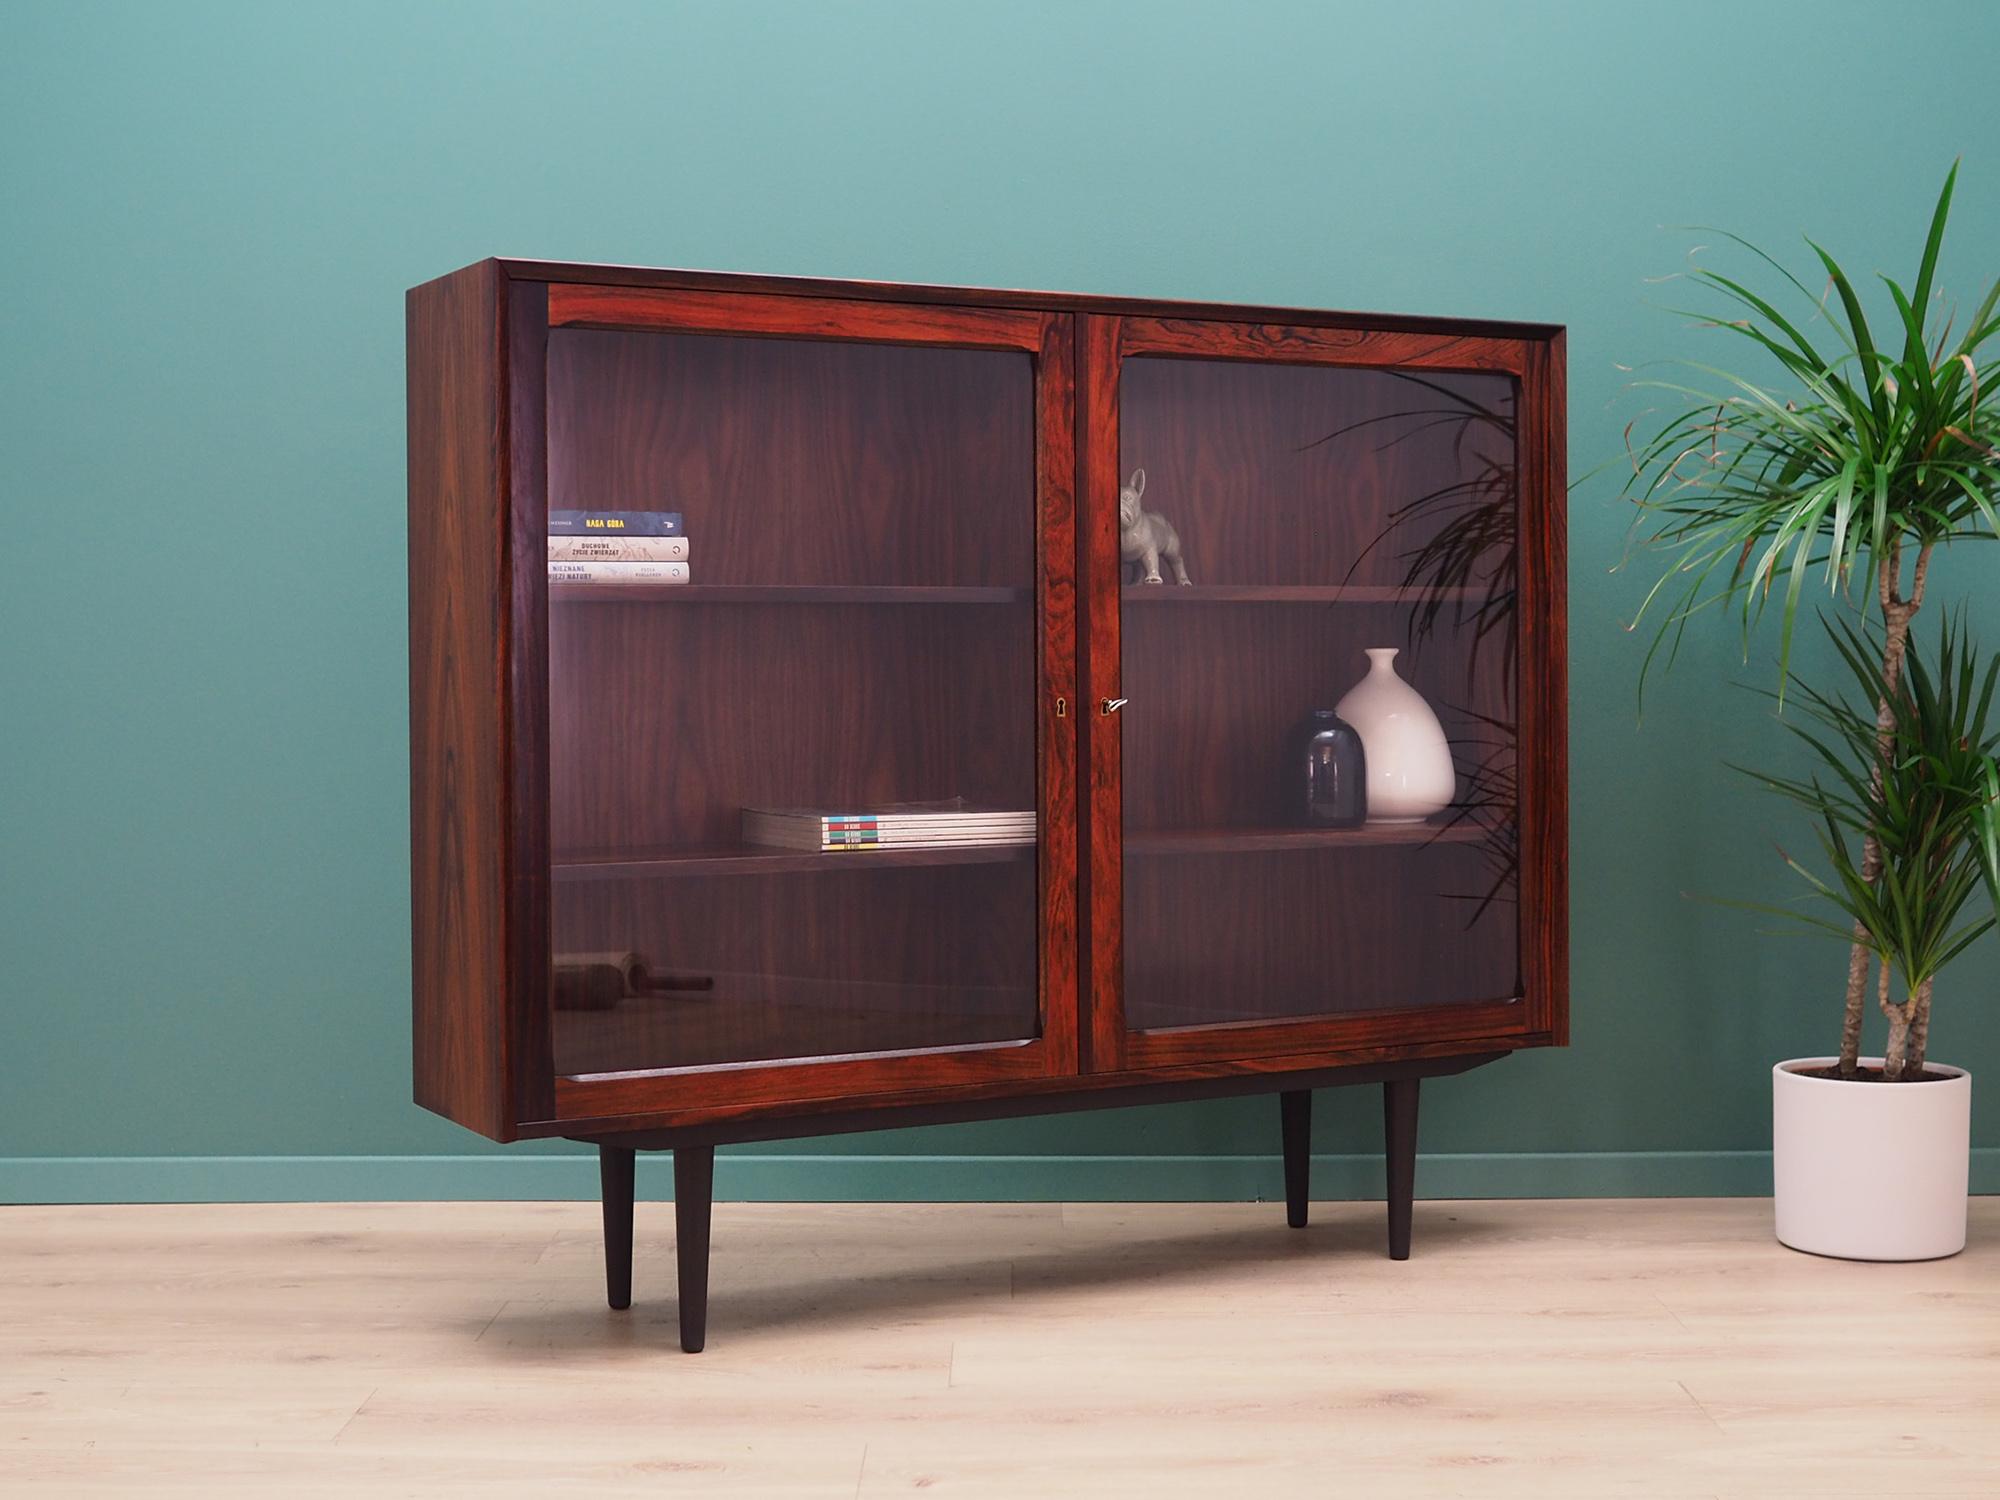 Phenomenal bookcase - library from the 1960s-1970s. Scandinavian design - minimalist form, excellent workmanship. Manufactured in the Brouer Mobelfabrik. The surface of the furniture finished with rosewood veneer. Shelves with height adjustment